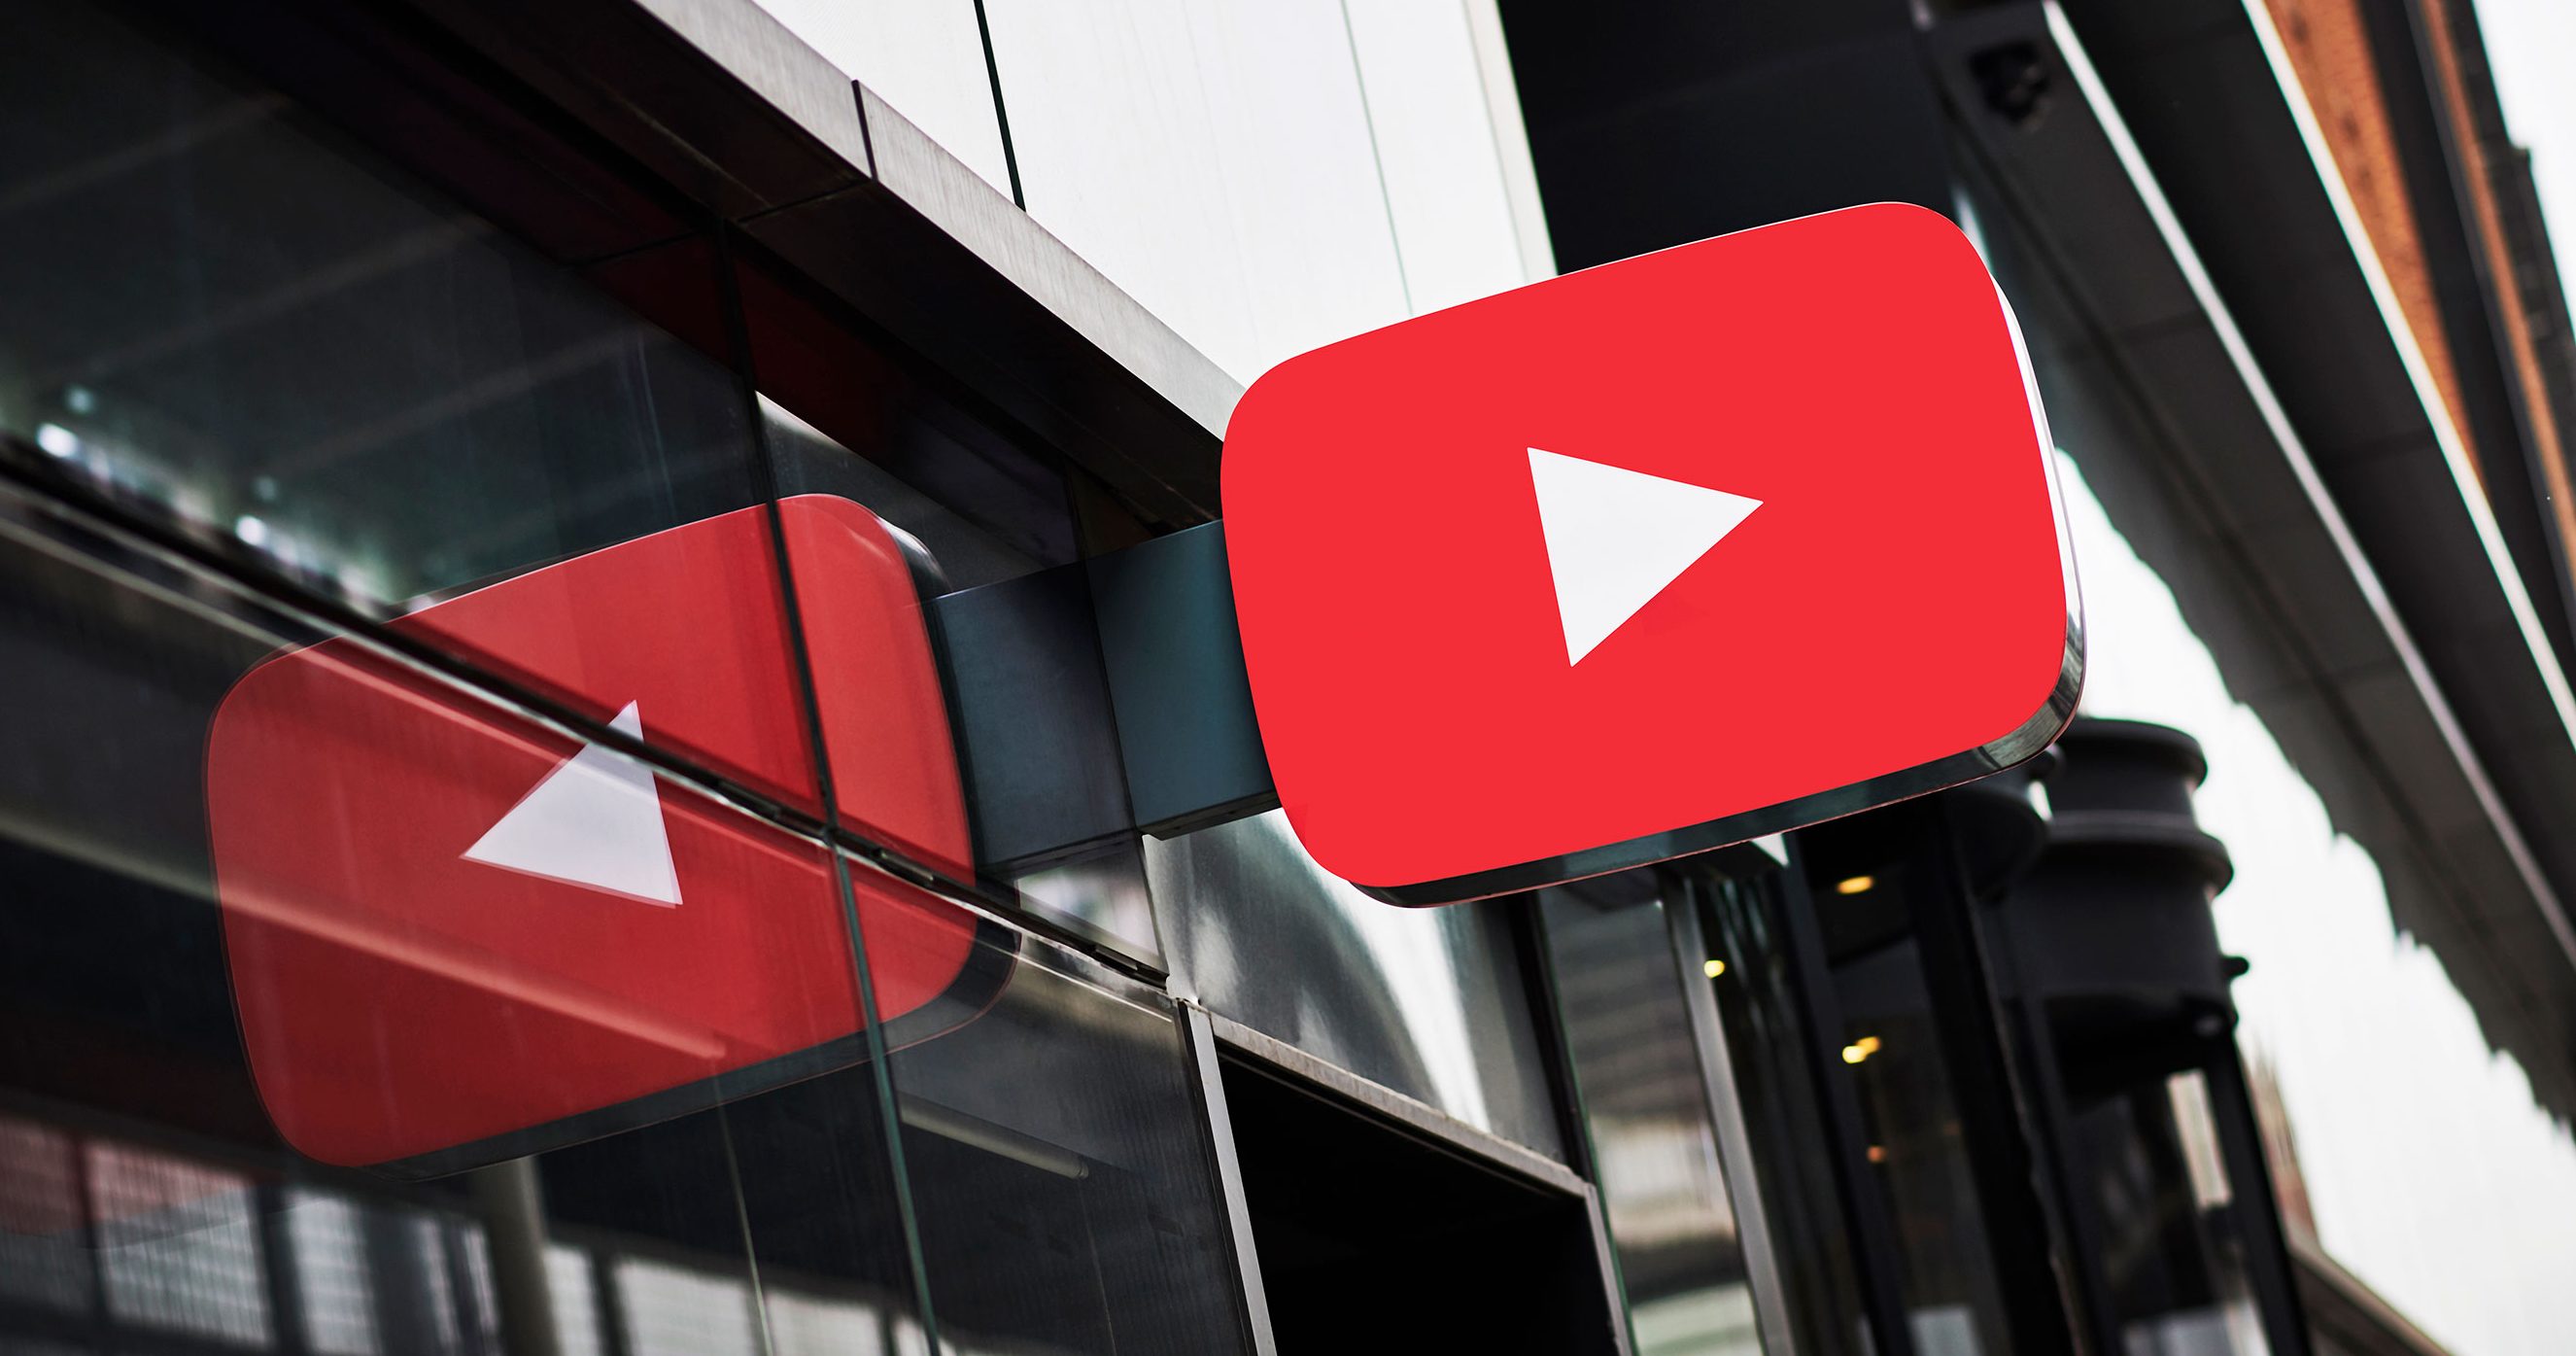 Google and YouTube say they won’t allow ads or monetized content pushing climate denial